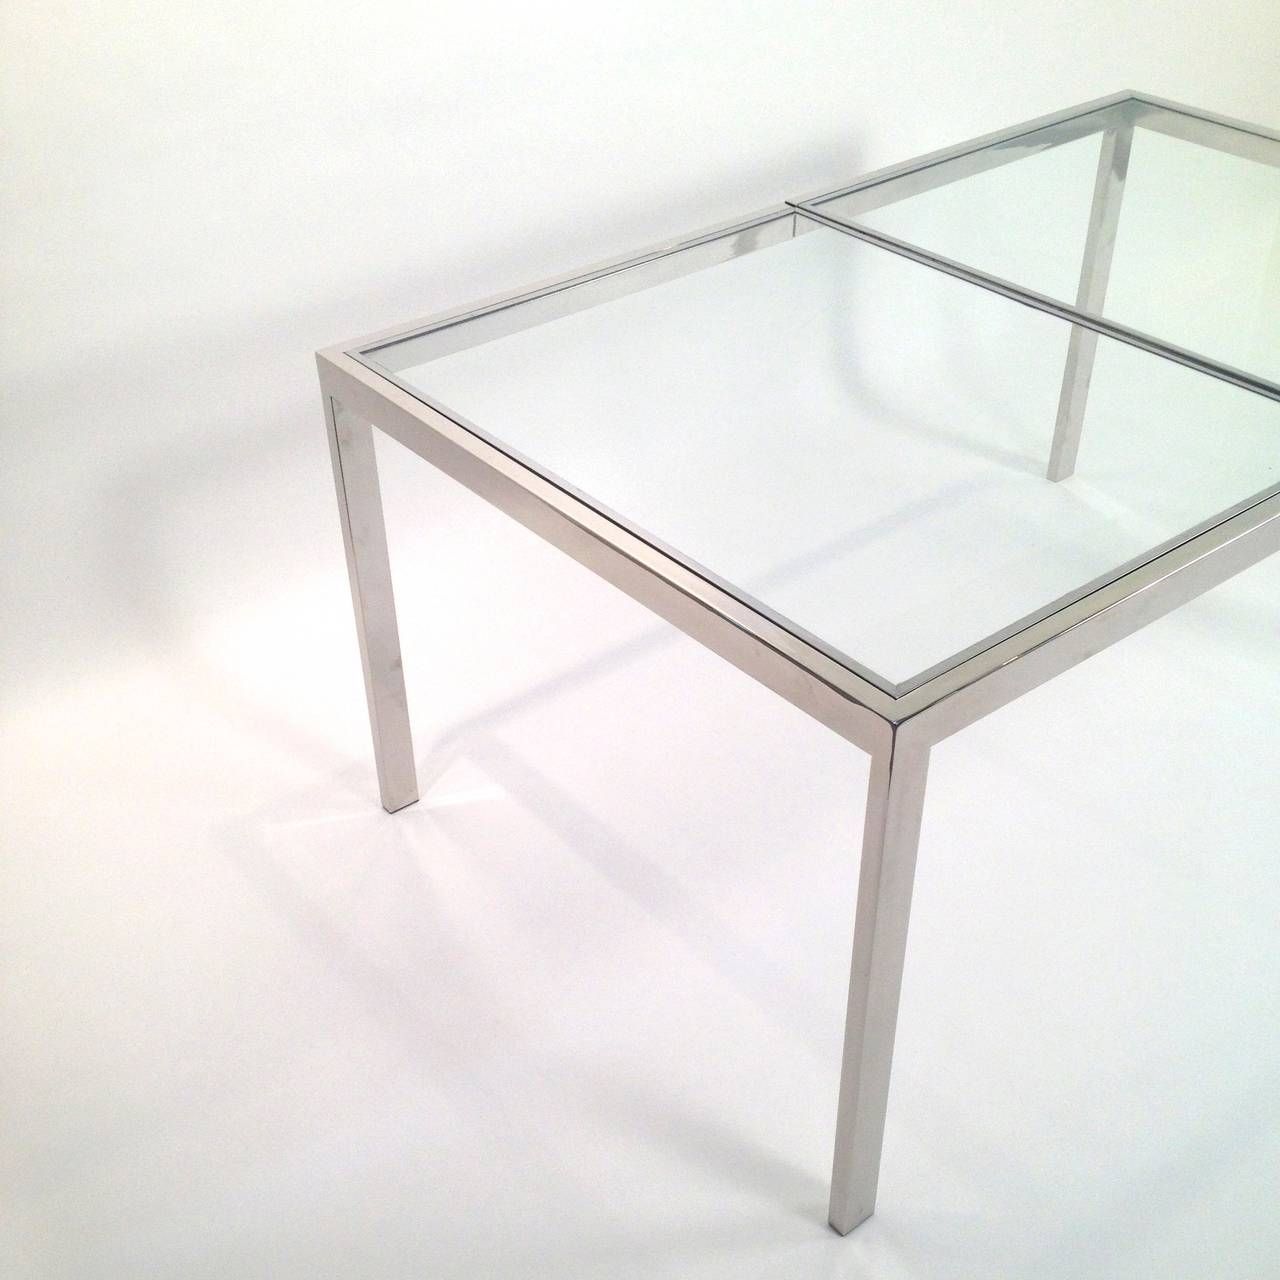 Milo Baughman Chrome And Glass Dining Table At 1stdibs Inside 2017 Chrome Glass Dining Tables (View 1 of 25)